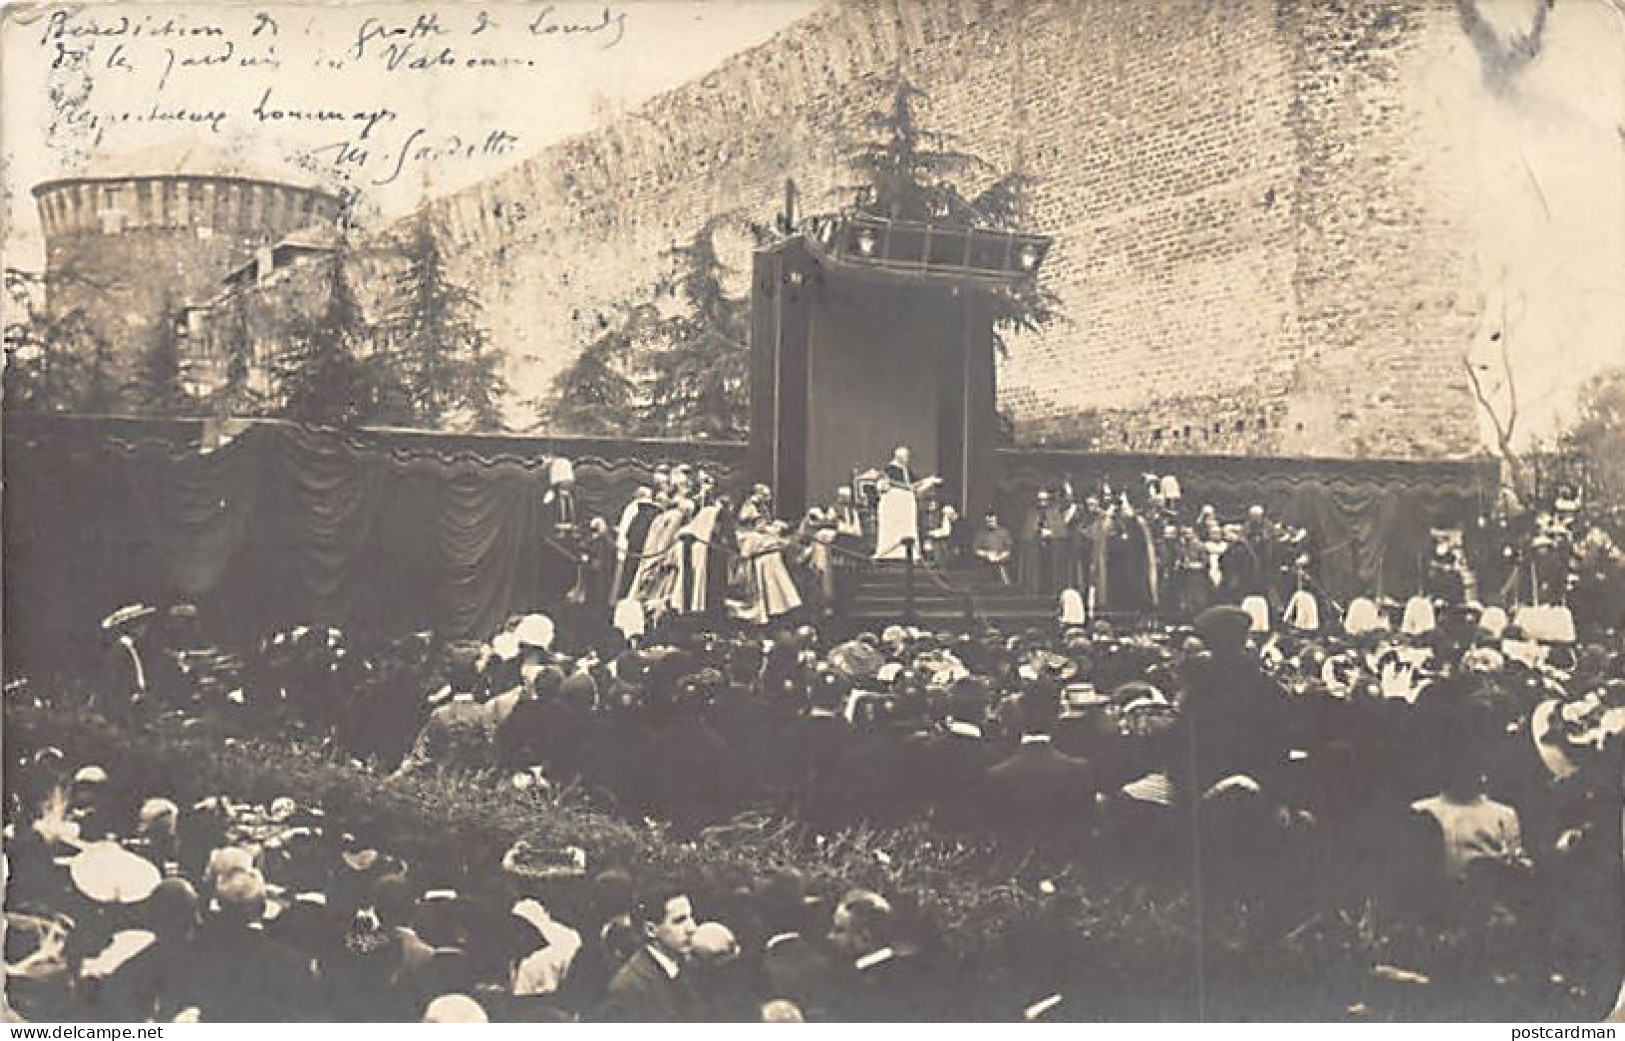 Vatican - Pope Pius X Blessing The Grotto Of Lourdes In The Gardens Of The Holy City, Year 1905 - REAL PHOTO. - Vaticano